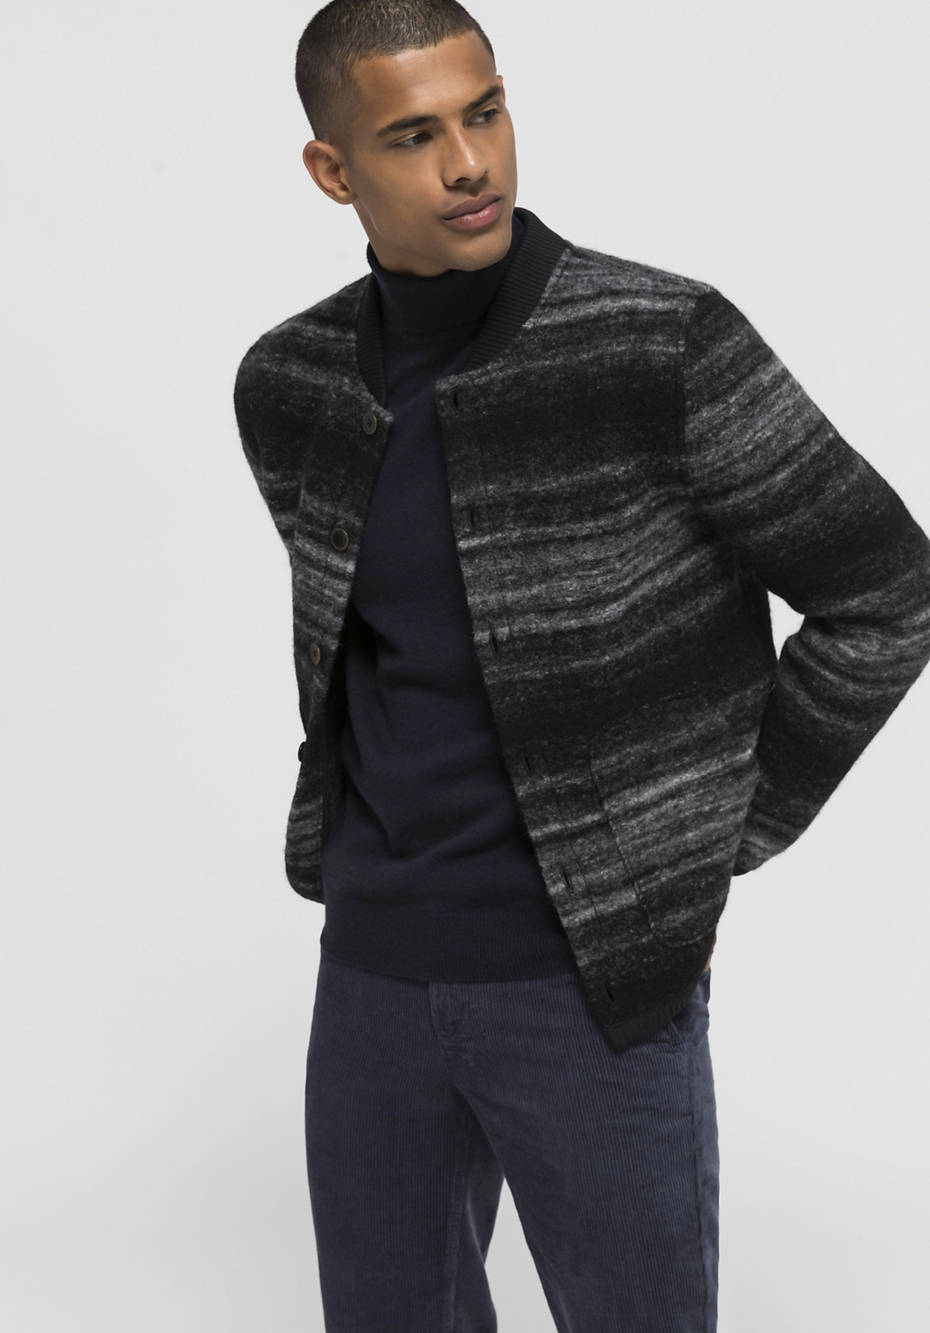 Boiled wool jacket made of organic new wool with organic cotton